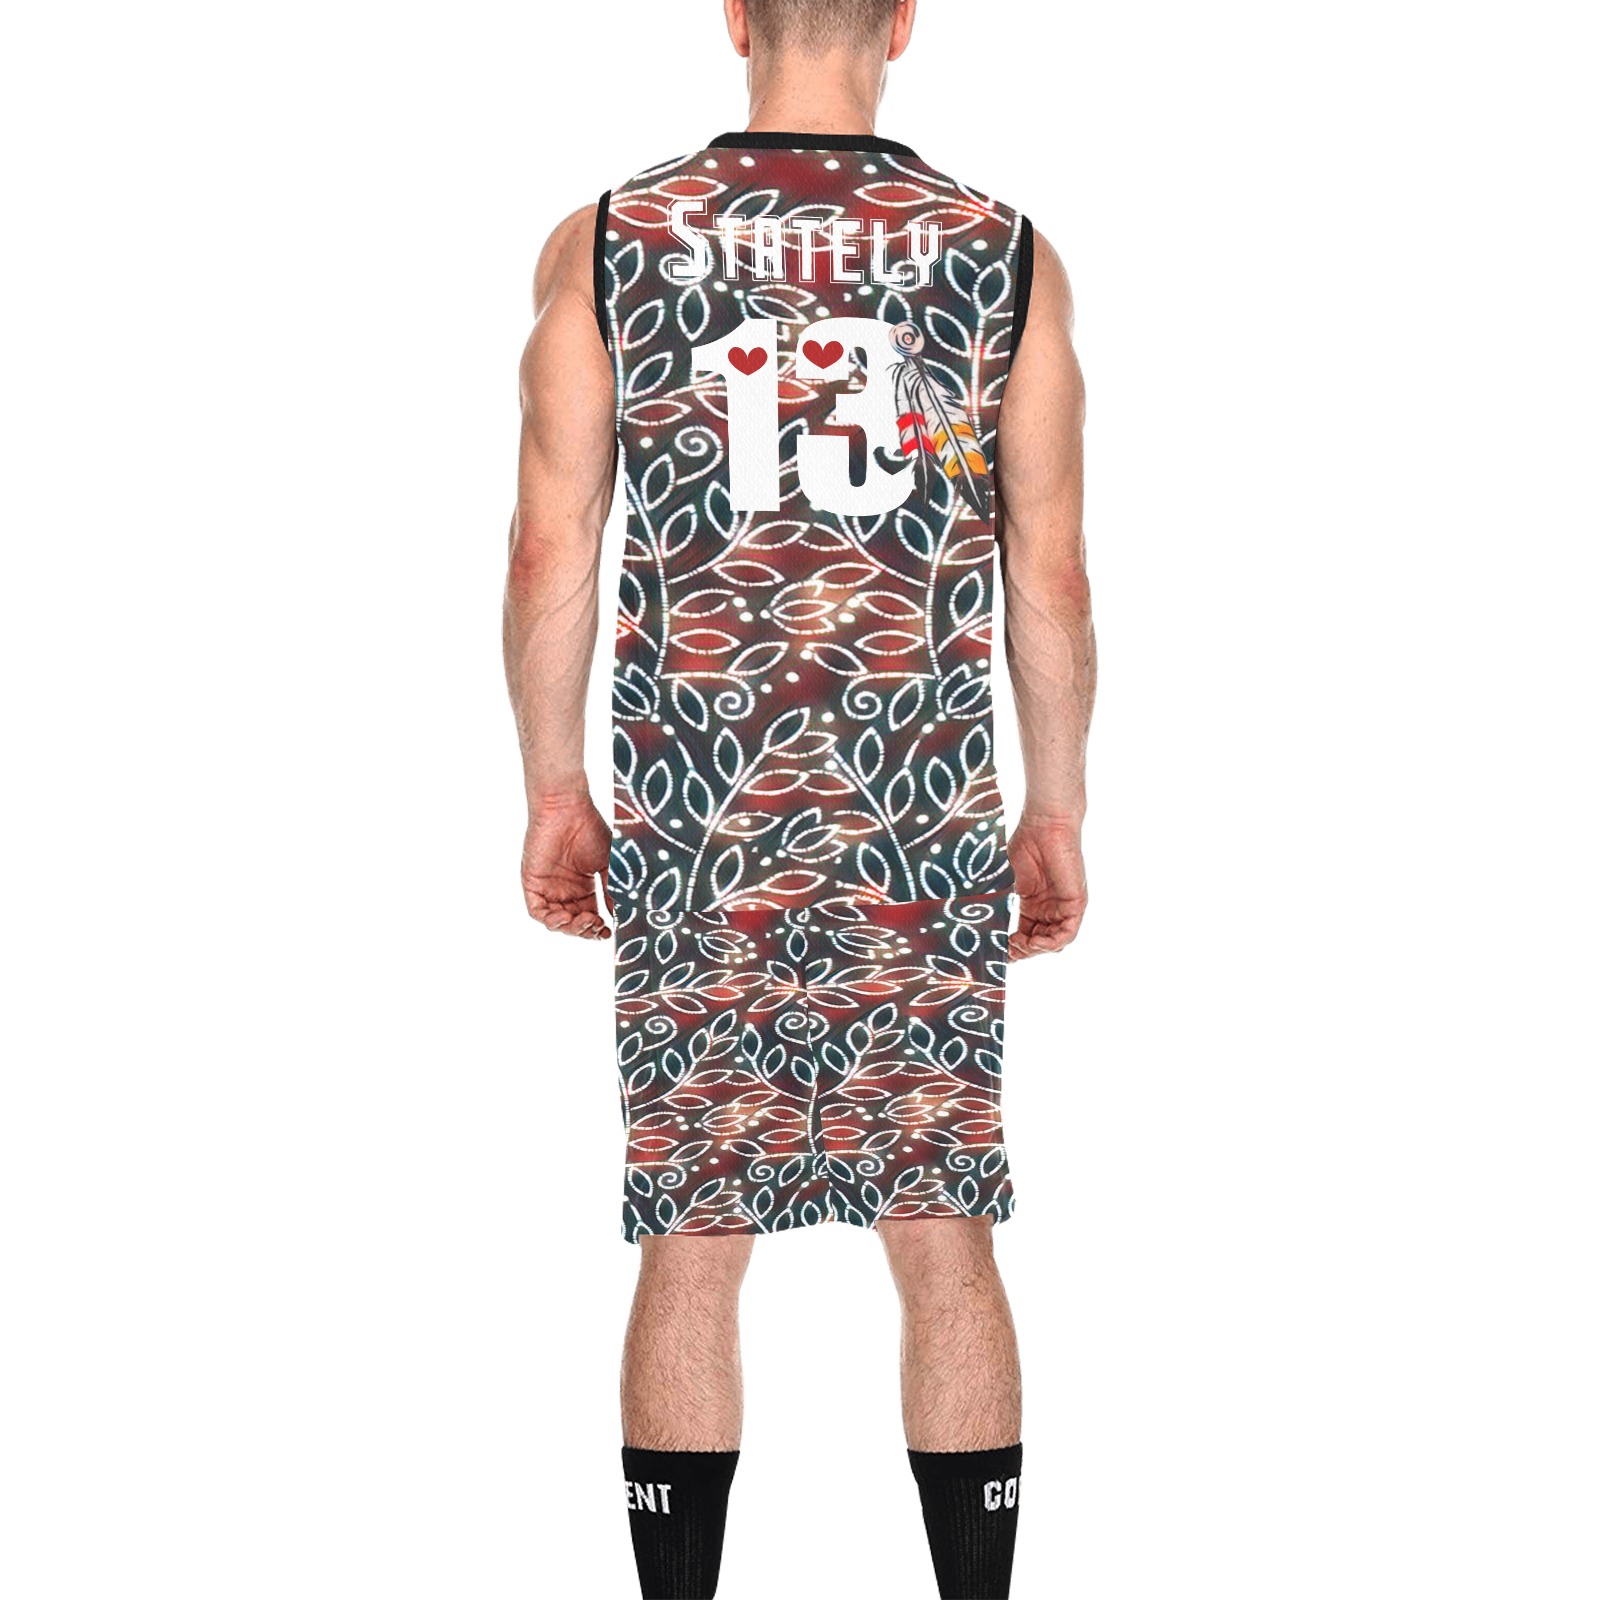 MMIW 13 stately All Over Print Basketball Uniform